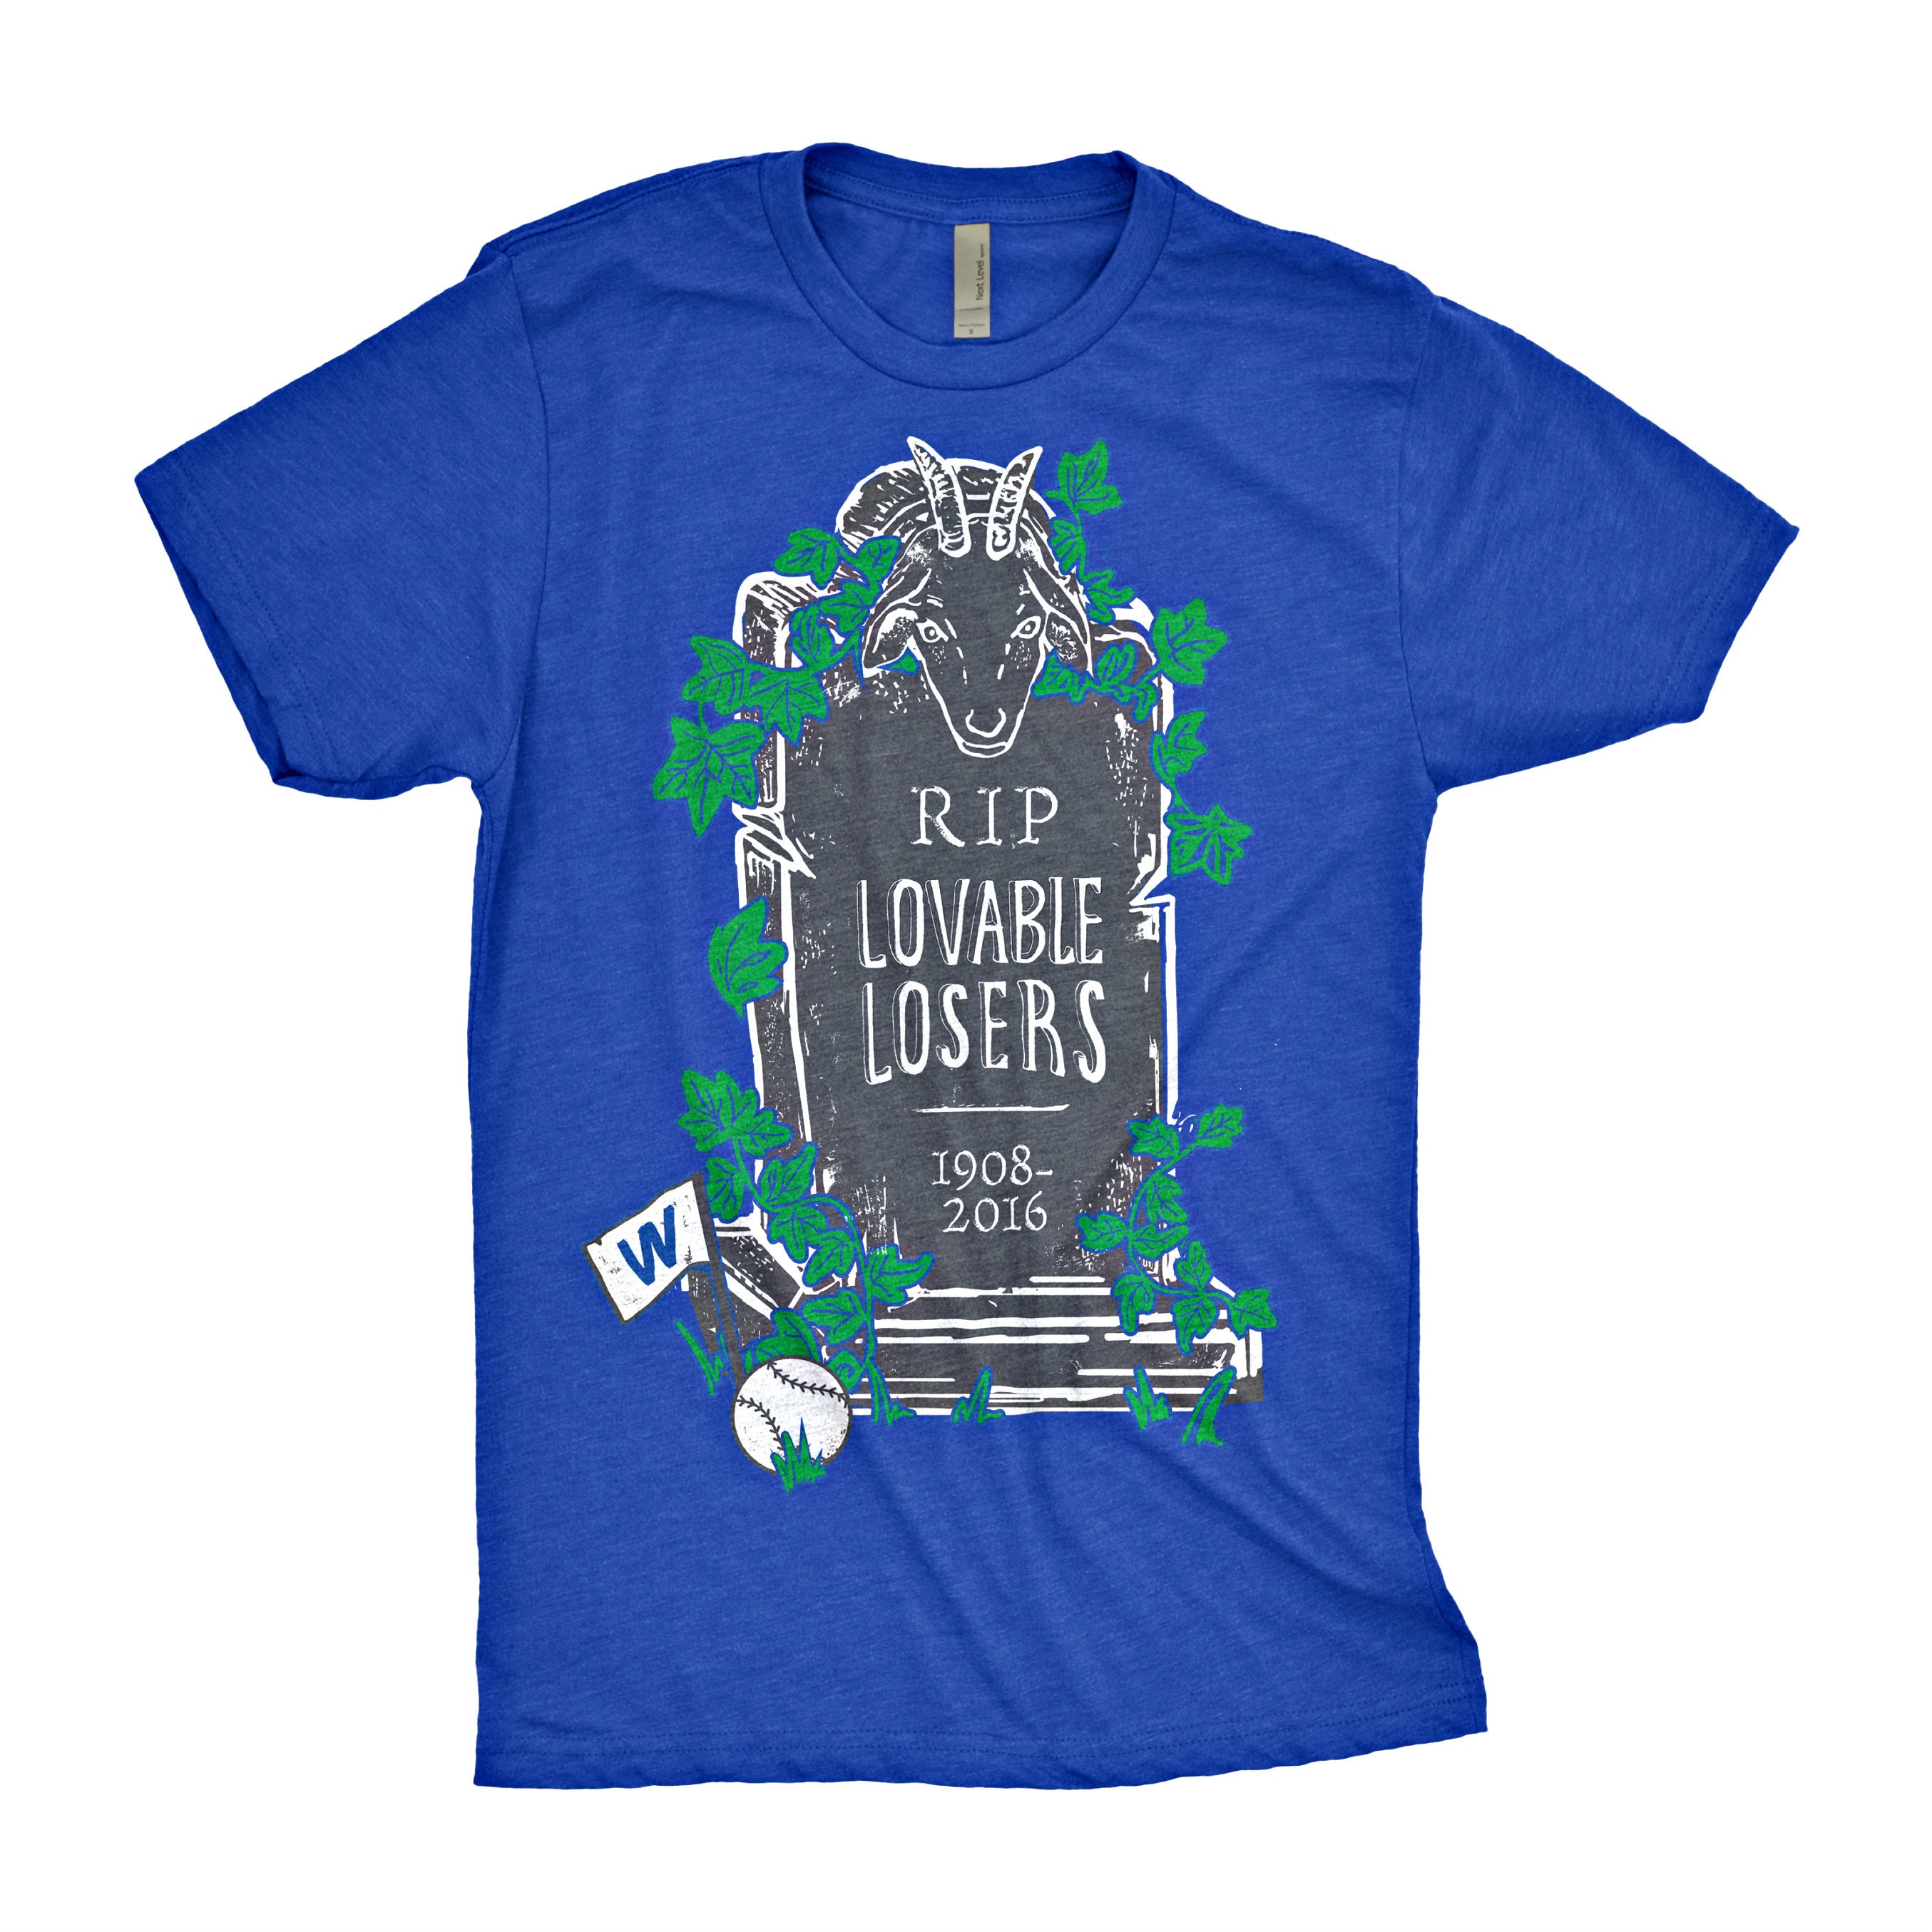 chitownclothing Rip Lovable Losers Chicago Cubs T-Shirt